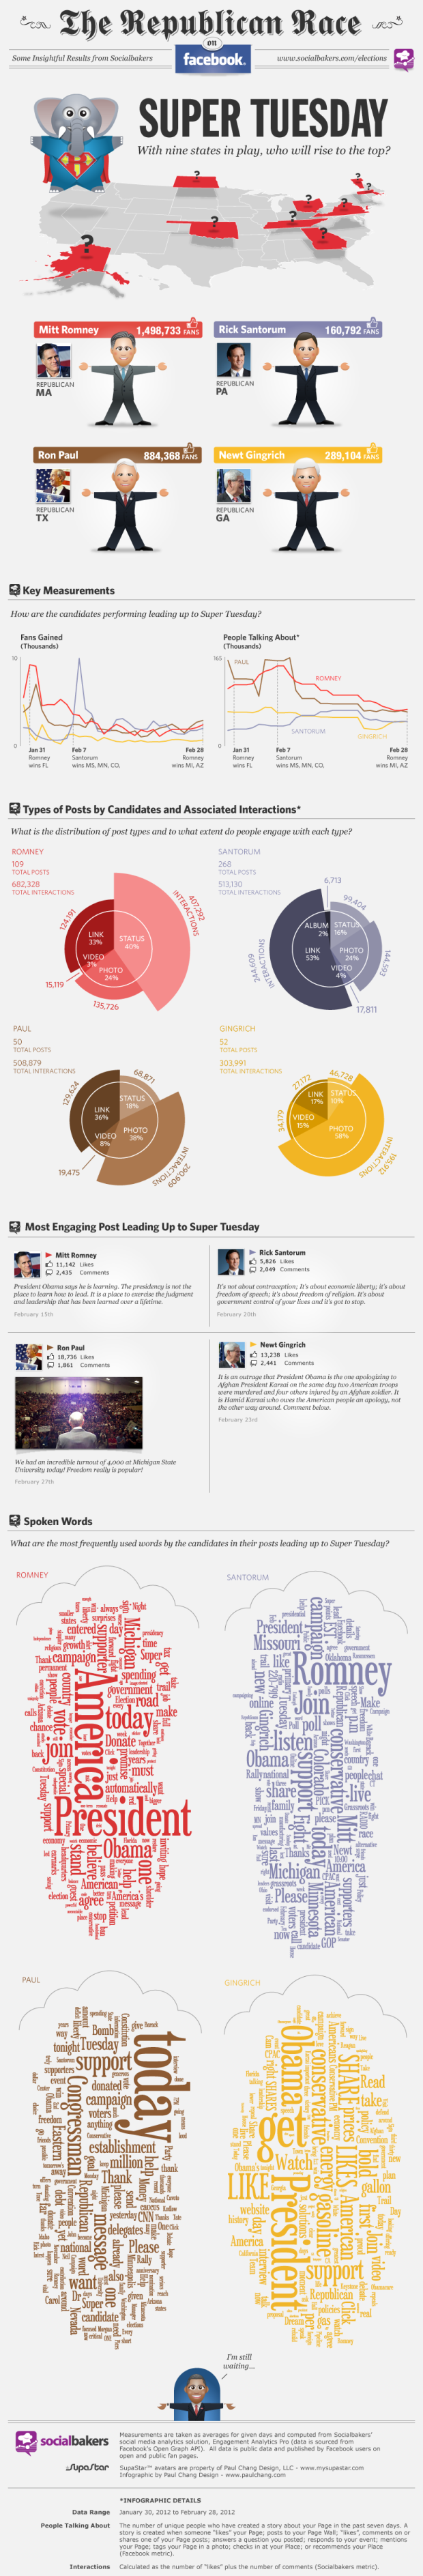 facebookinfographicsupertuesday2012.png